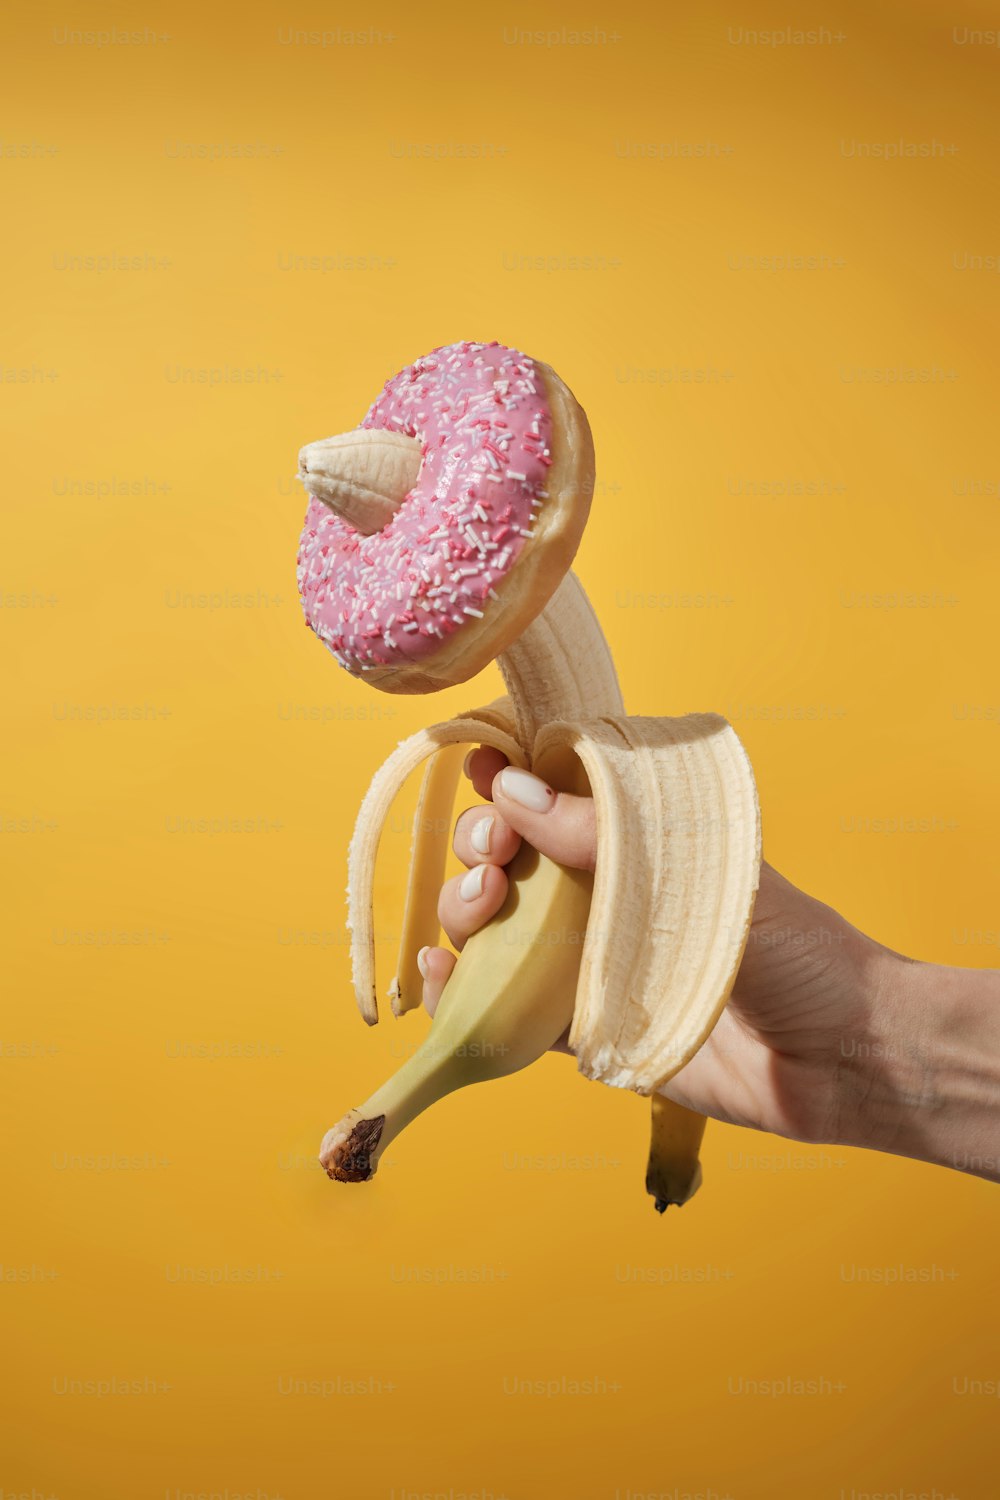 a person is holding a banana and a donut